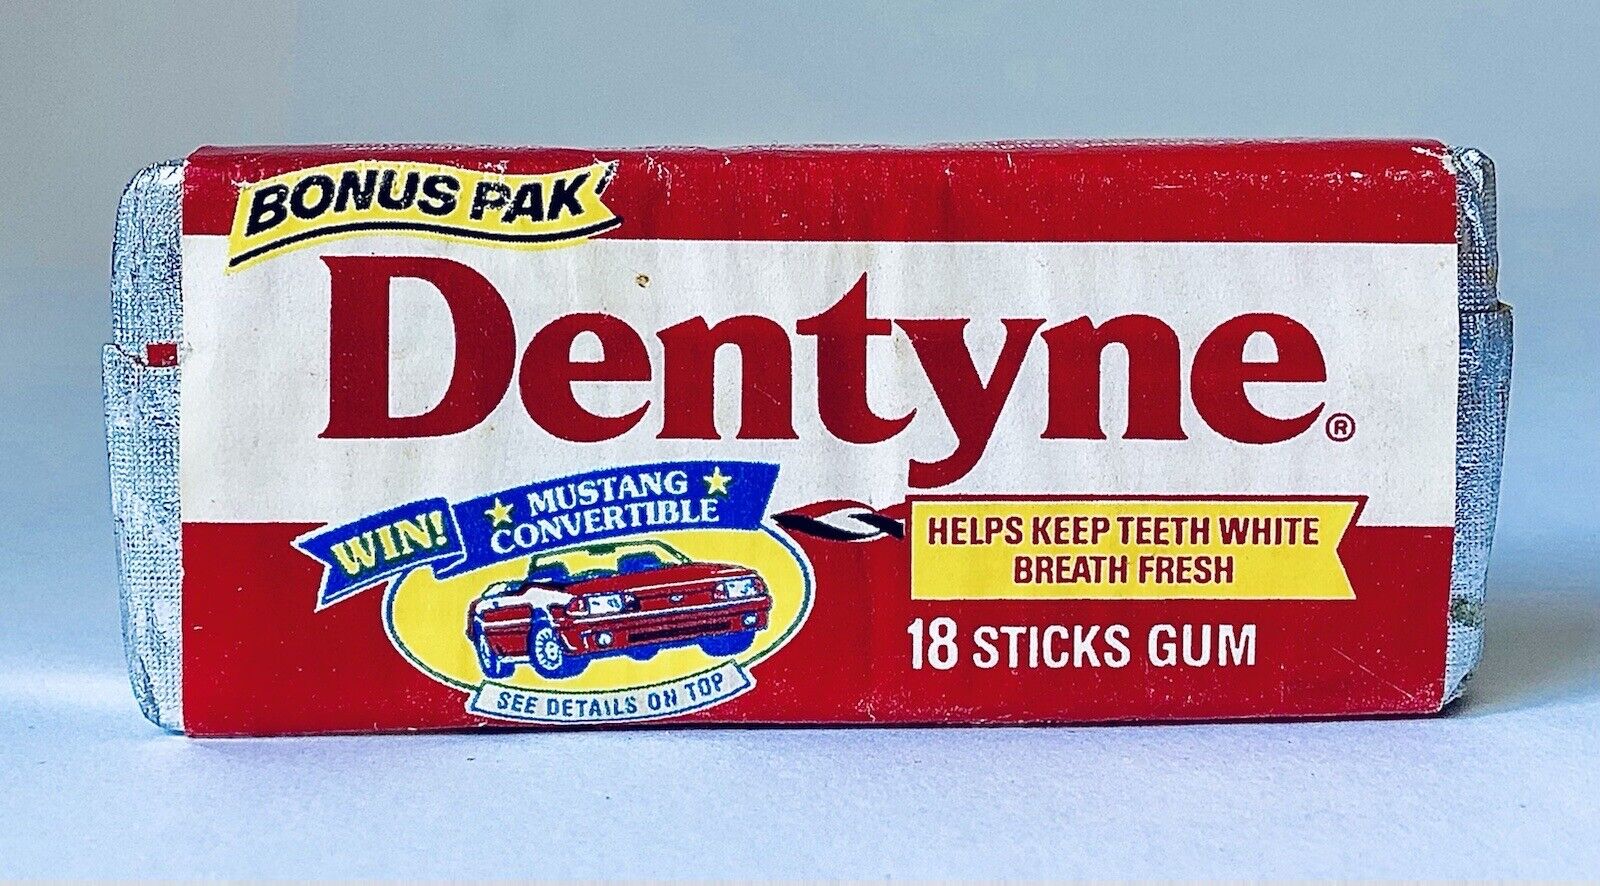 Vintage 1990 DENTYNE Chewing Gum Pack WIN A MUSTANG CONVERTIBLE container candy